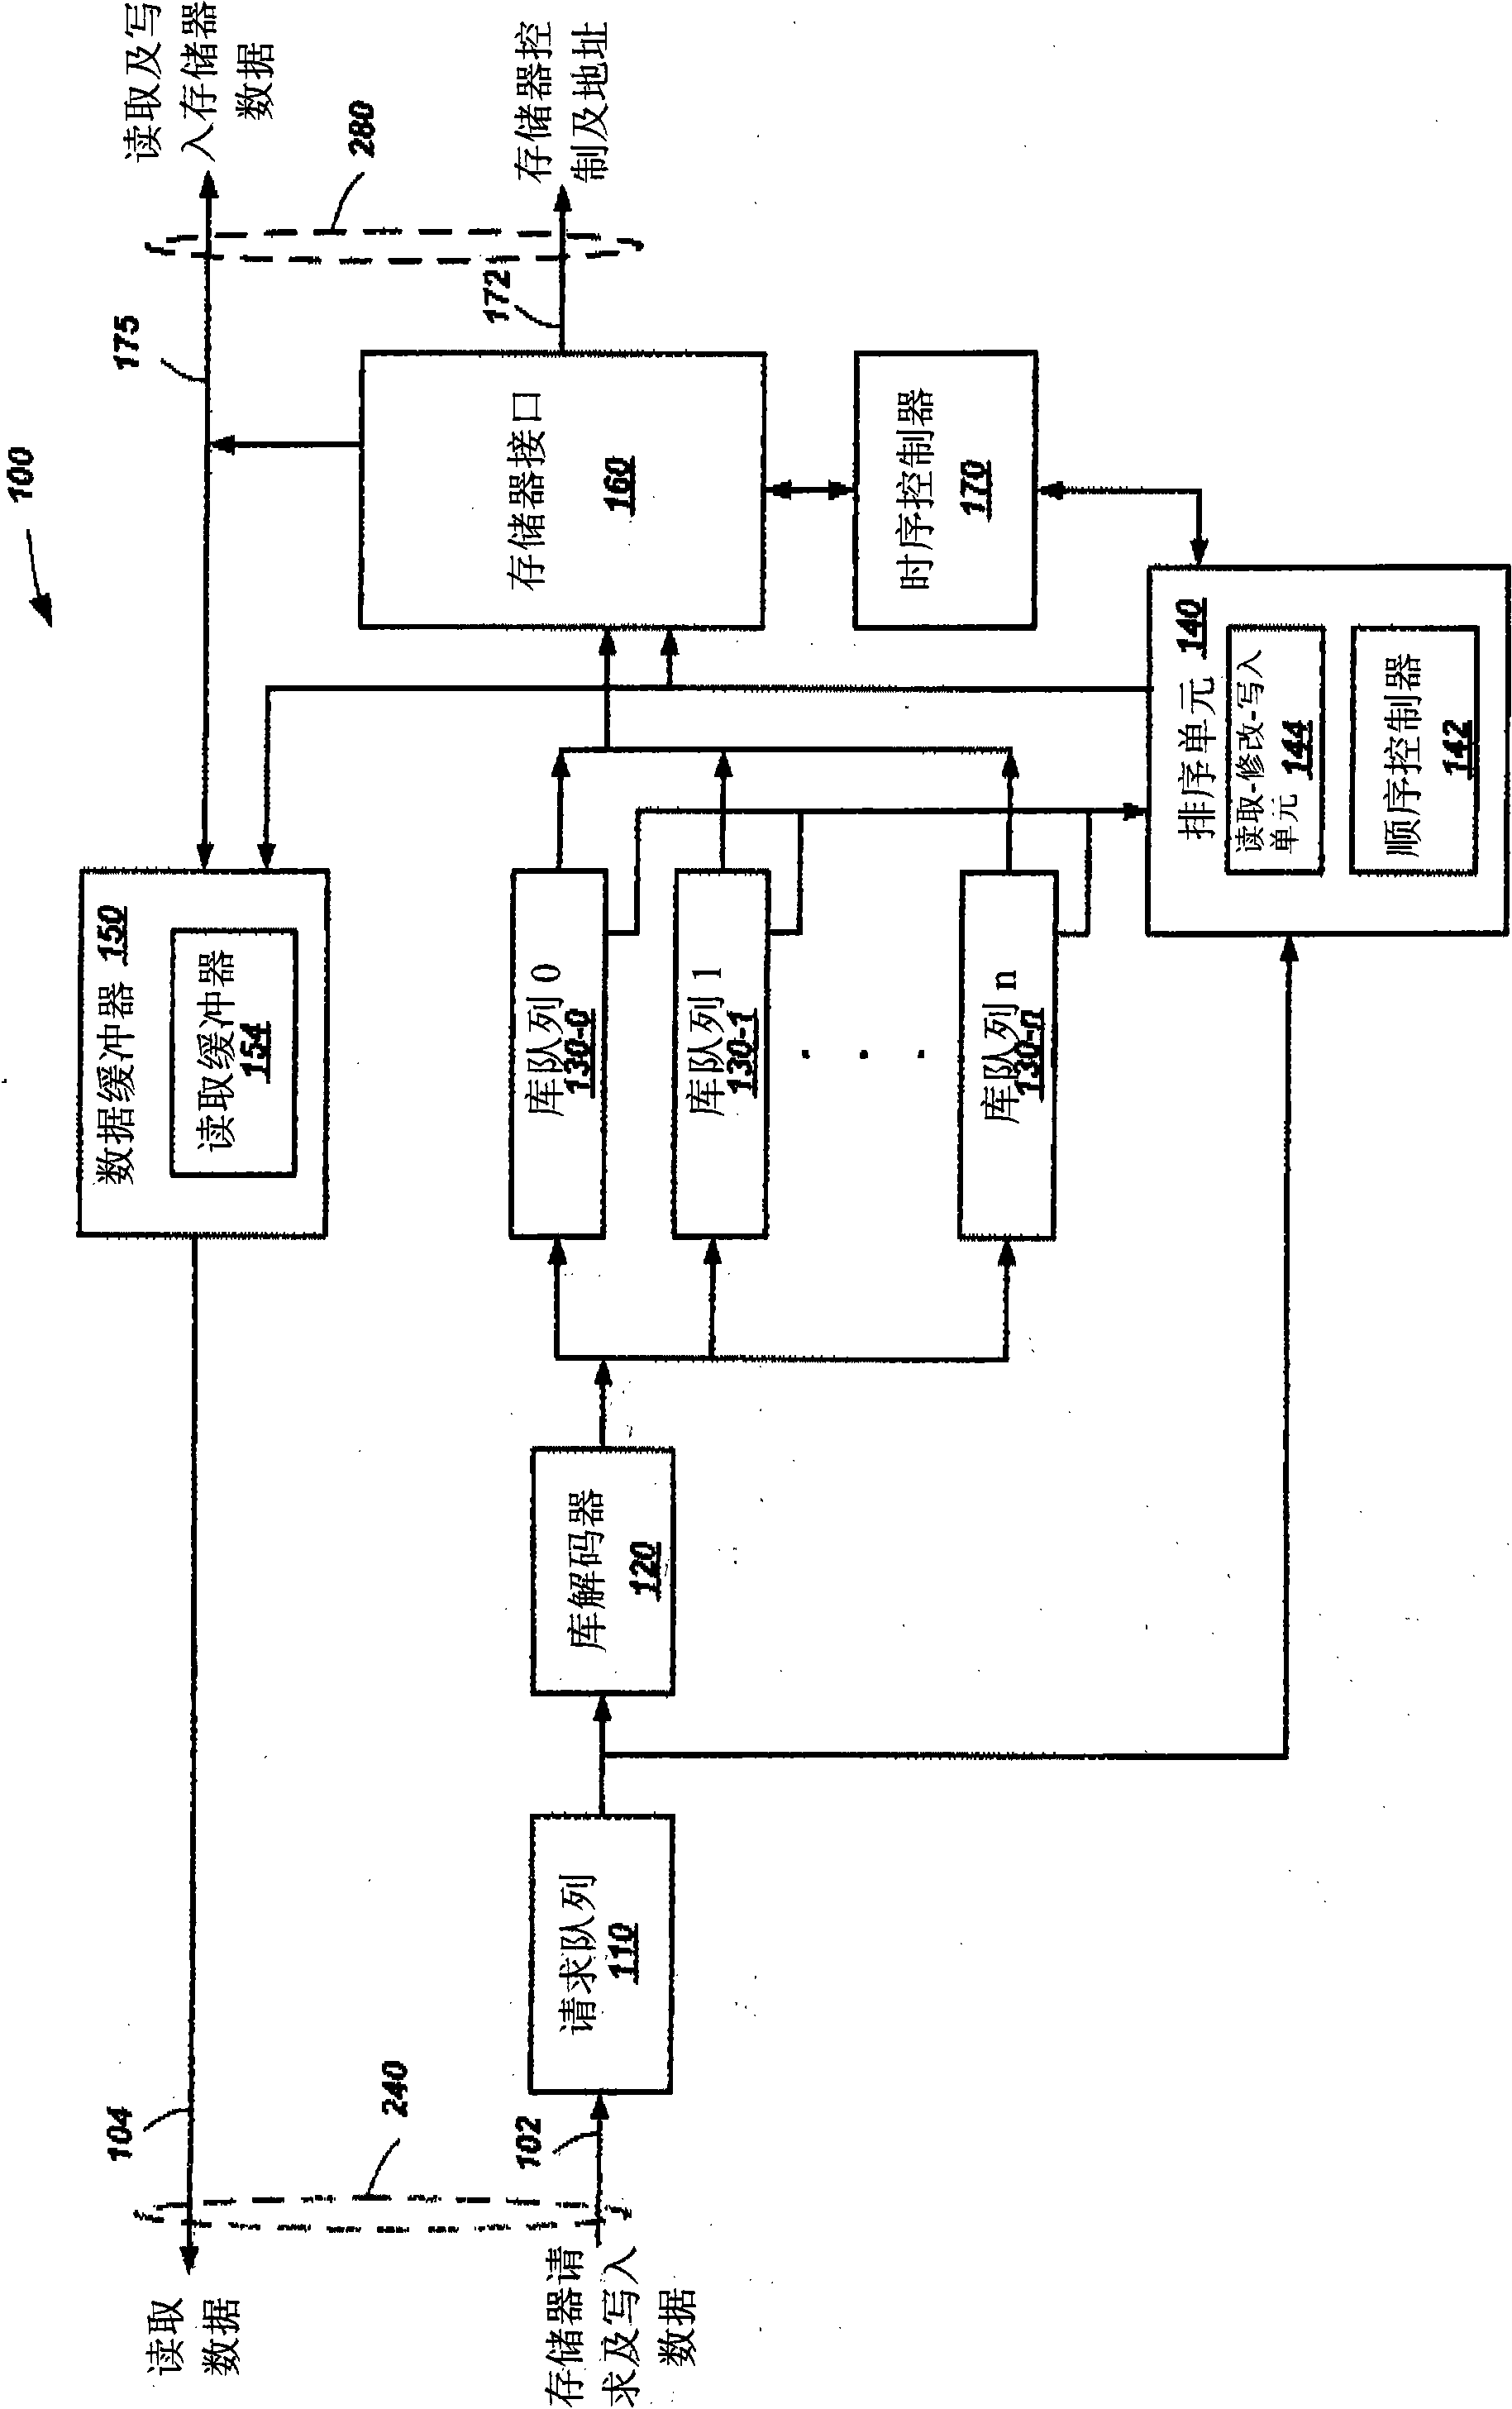 System, apparatus, and method for modifying the order of memory accesses